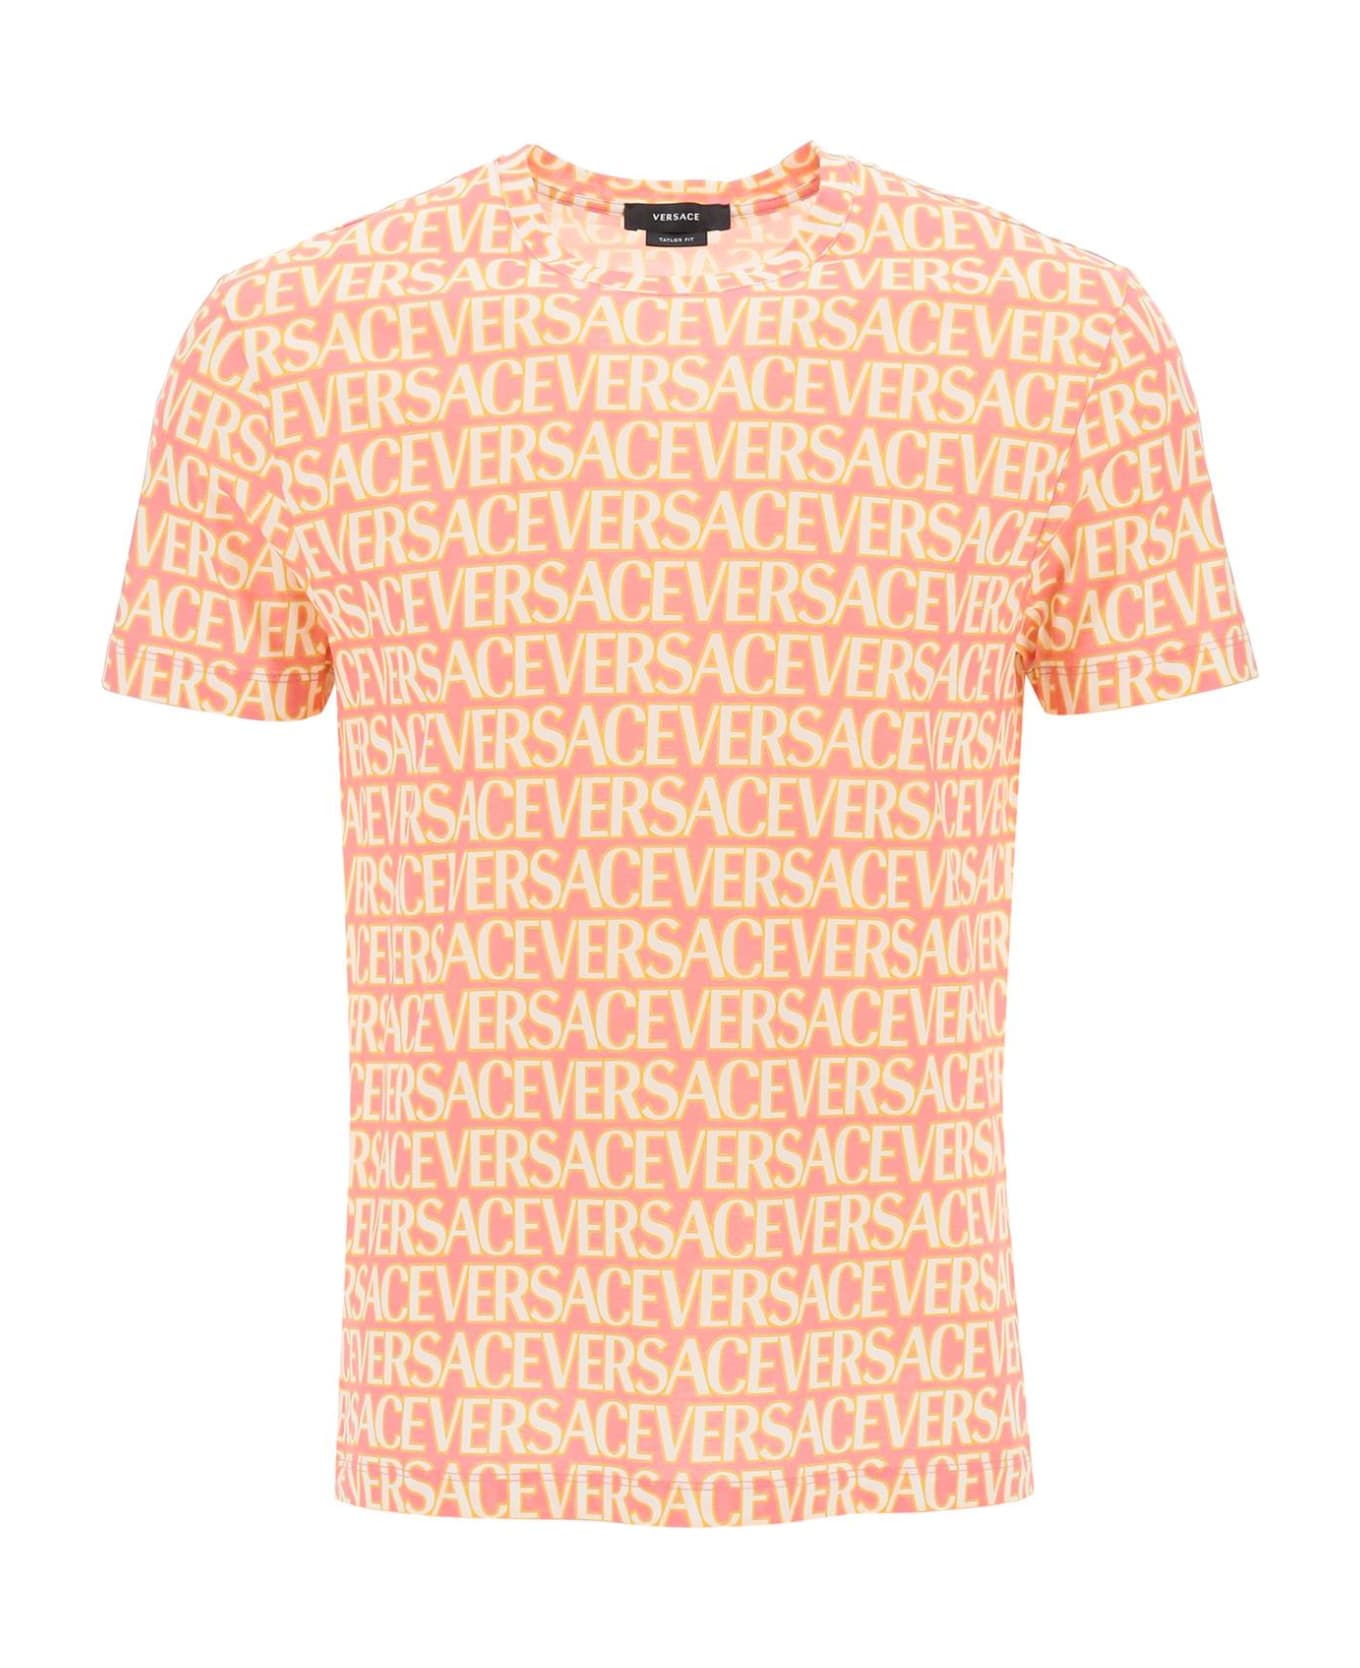 Versace Allover T-shirt - PINK IVORY (White) シャツ